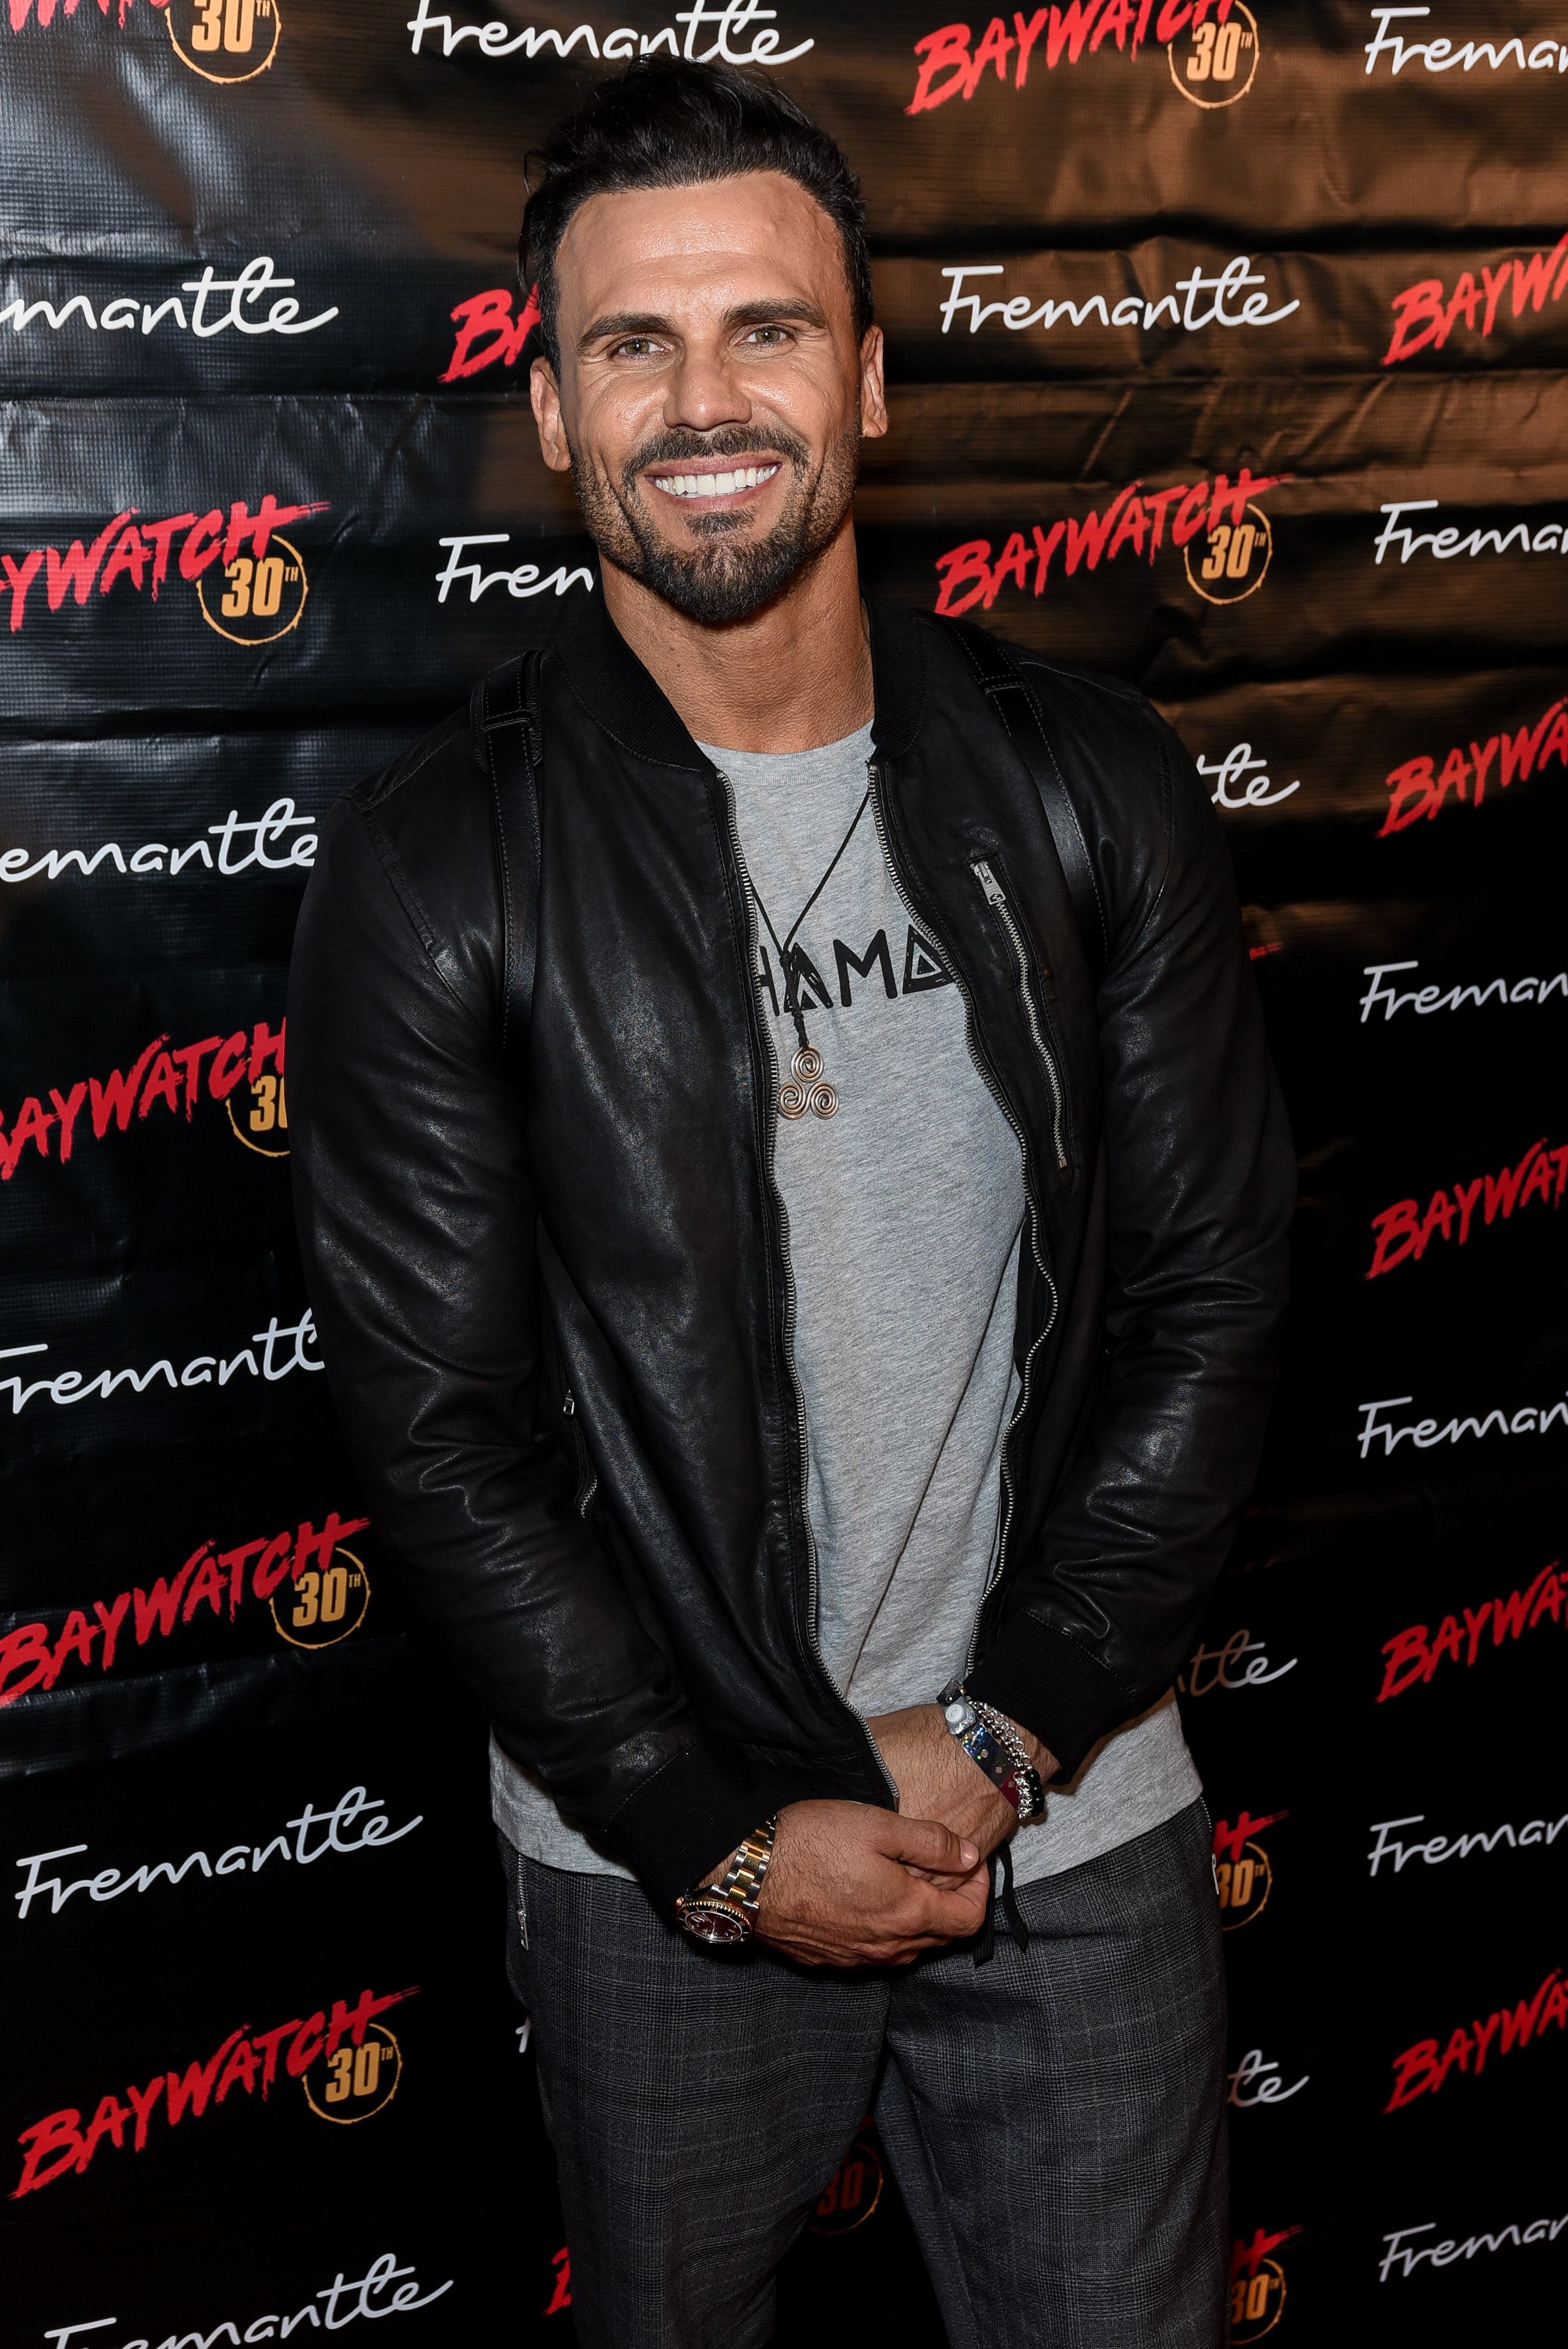 Jeremy Jackson attends 30th Anniversary of "Baywatch" at the Viceroy Hotel on September 24, 2019 in Santa Monica, California. | Source: Getty Images